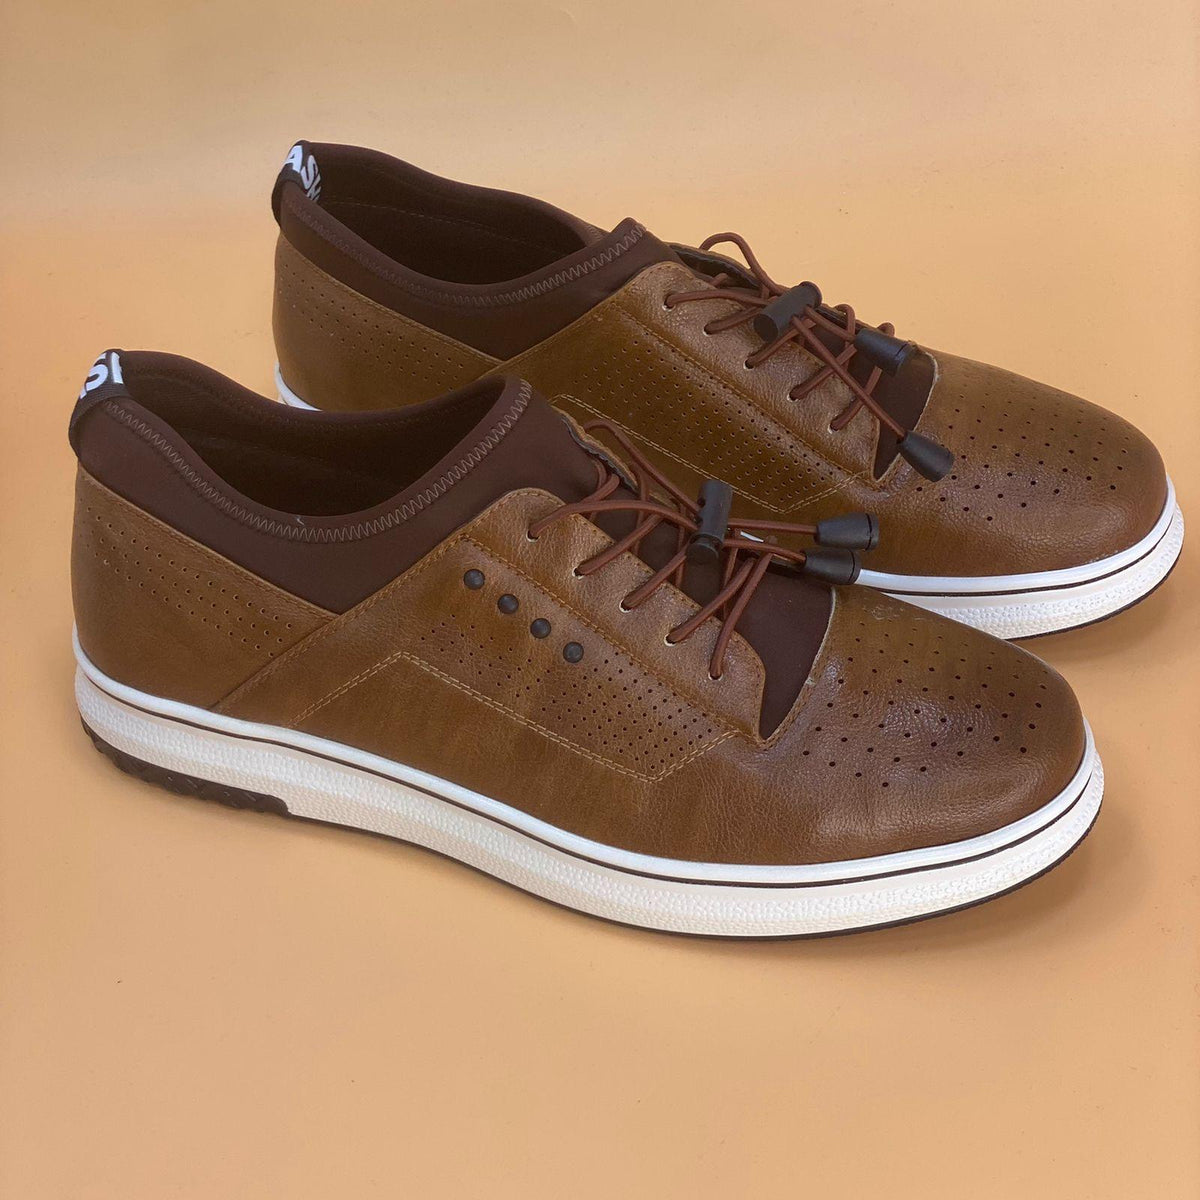 MEN SHOES  M836 , MADE IN CHINA - Olive Tree Shoes 